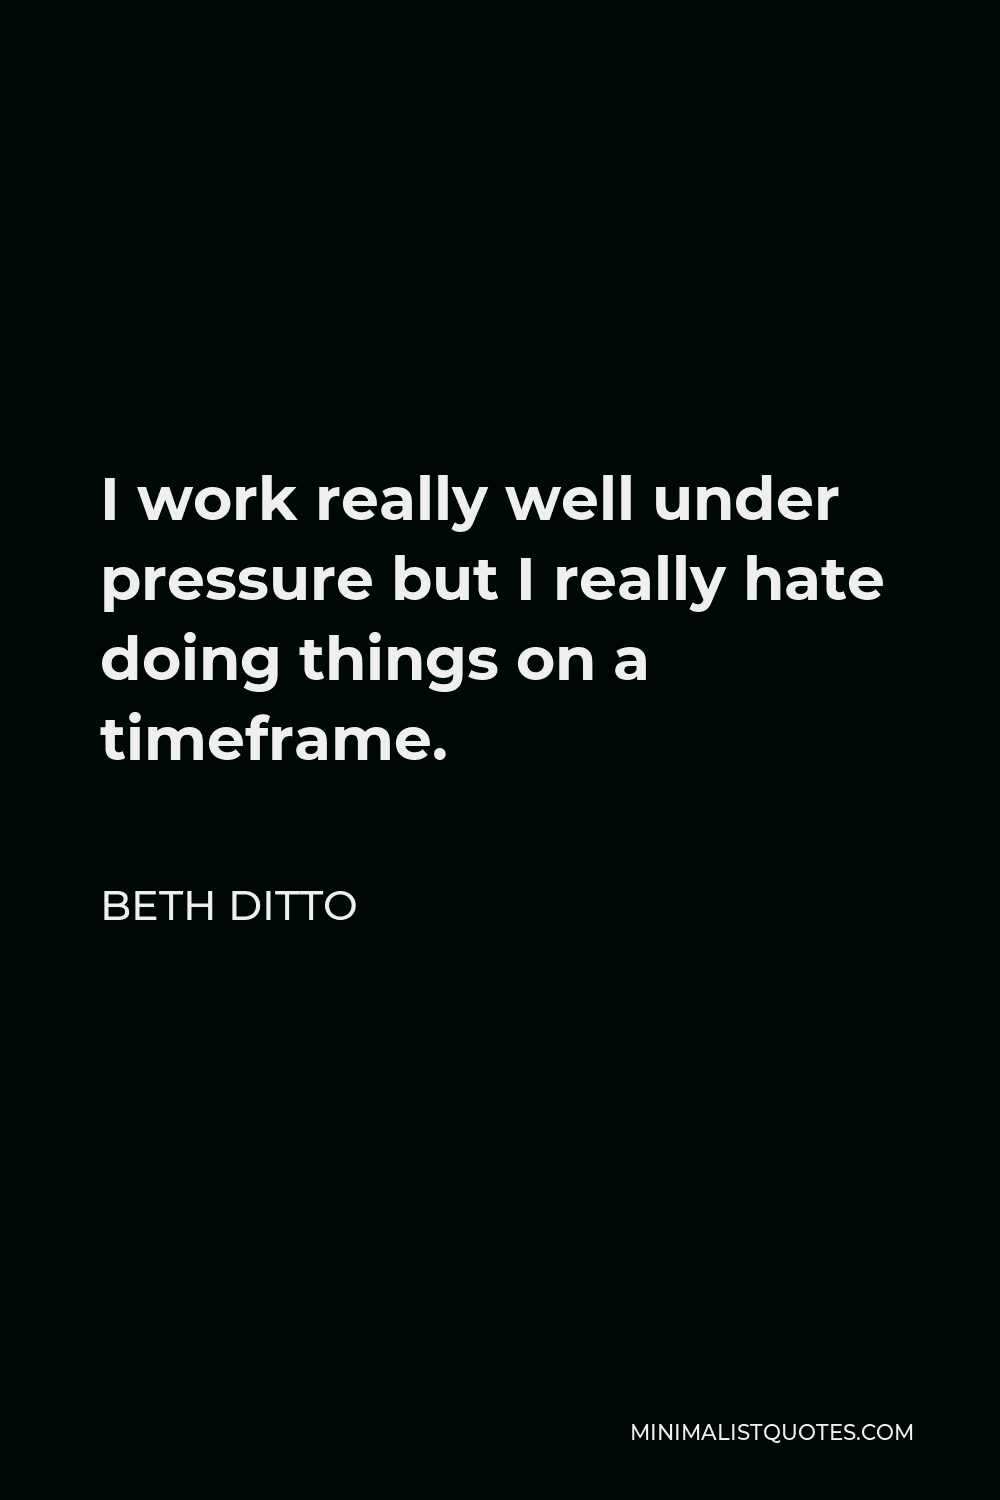 Beth Ditto Quote - I work really well under pressure but I really hate doing things on a timeframe.